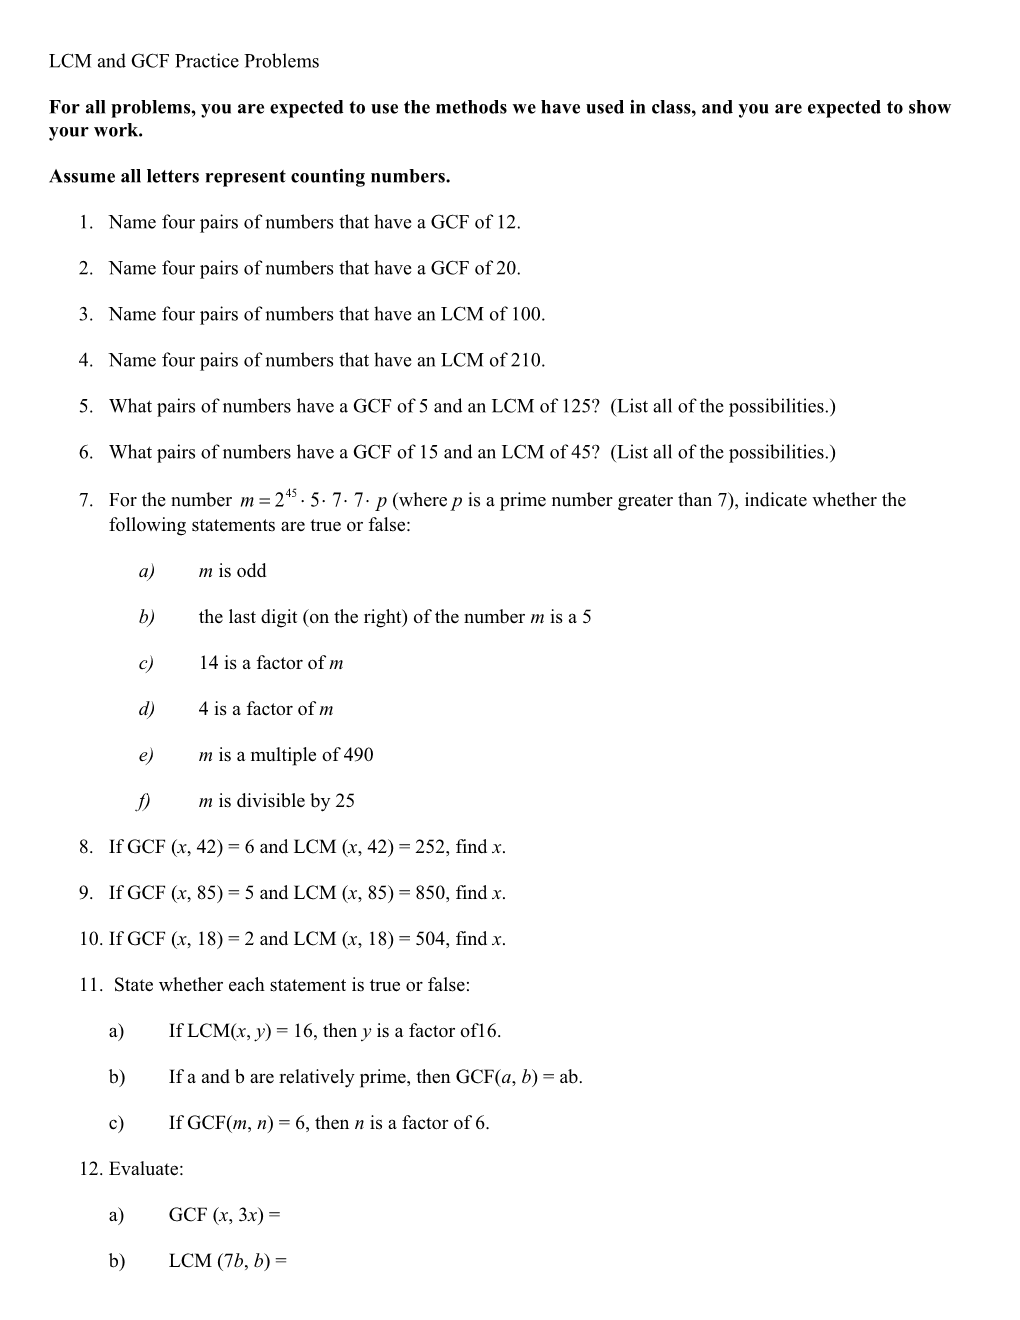 LCM and GCF Practice Problems for Test 4